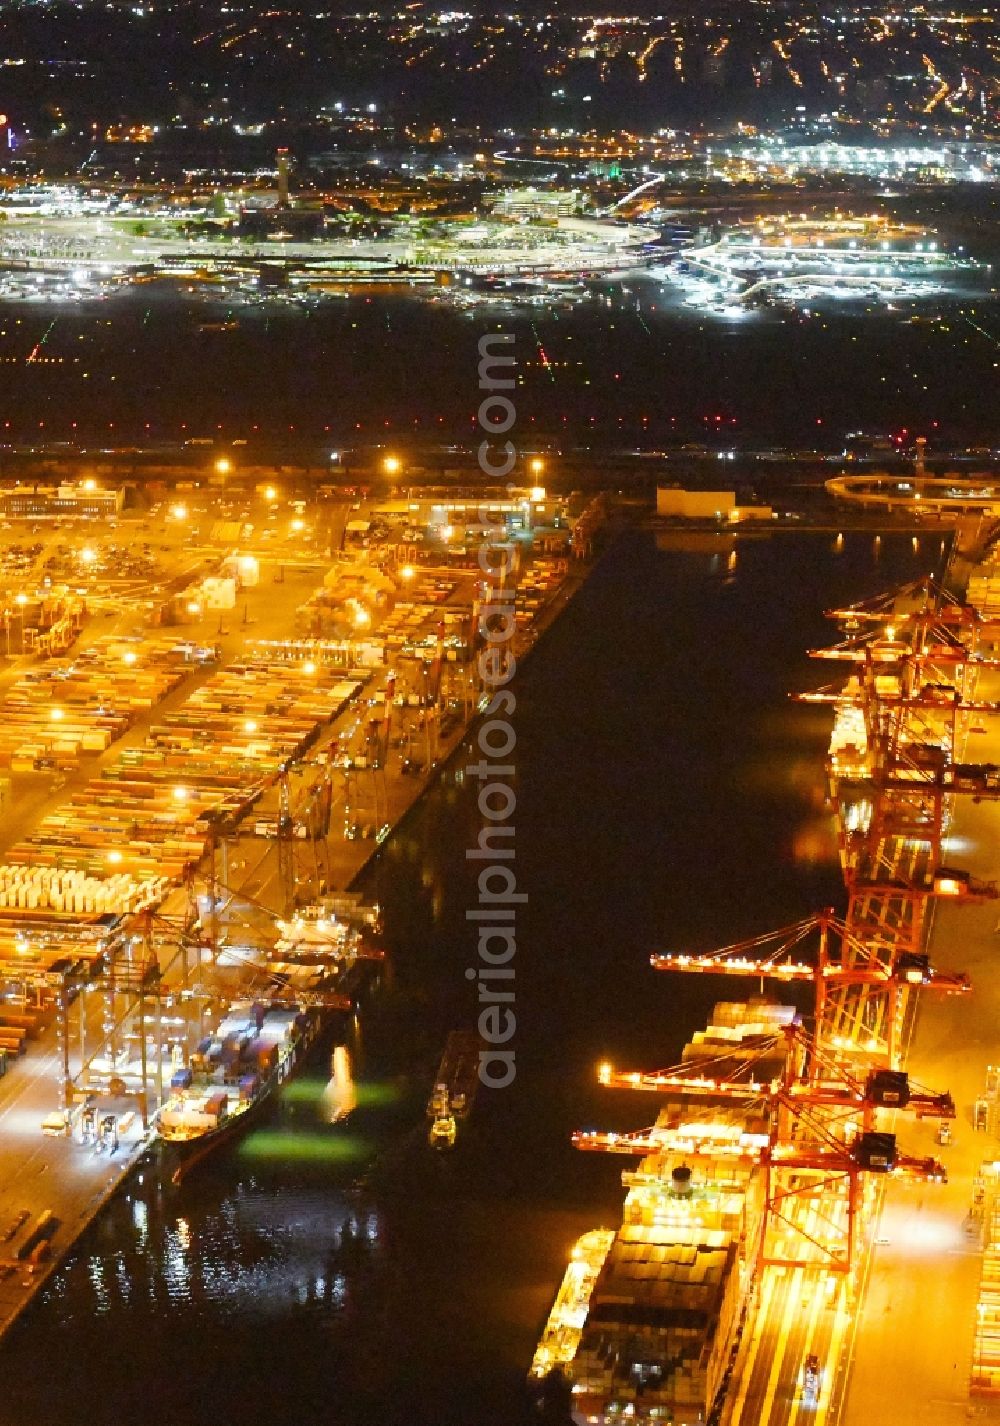 Newark at night from above - Night lighting Container Terminal in the port of the international port Port Newark on E Bay Ave in Newark in New Jersey, United States of America